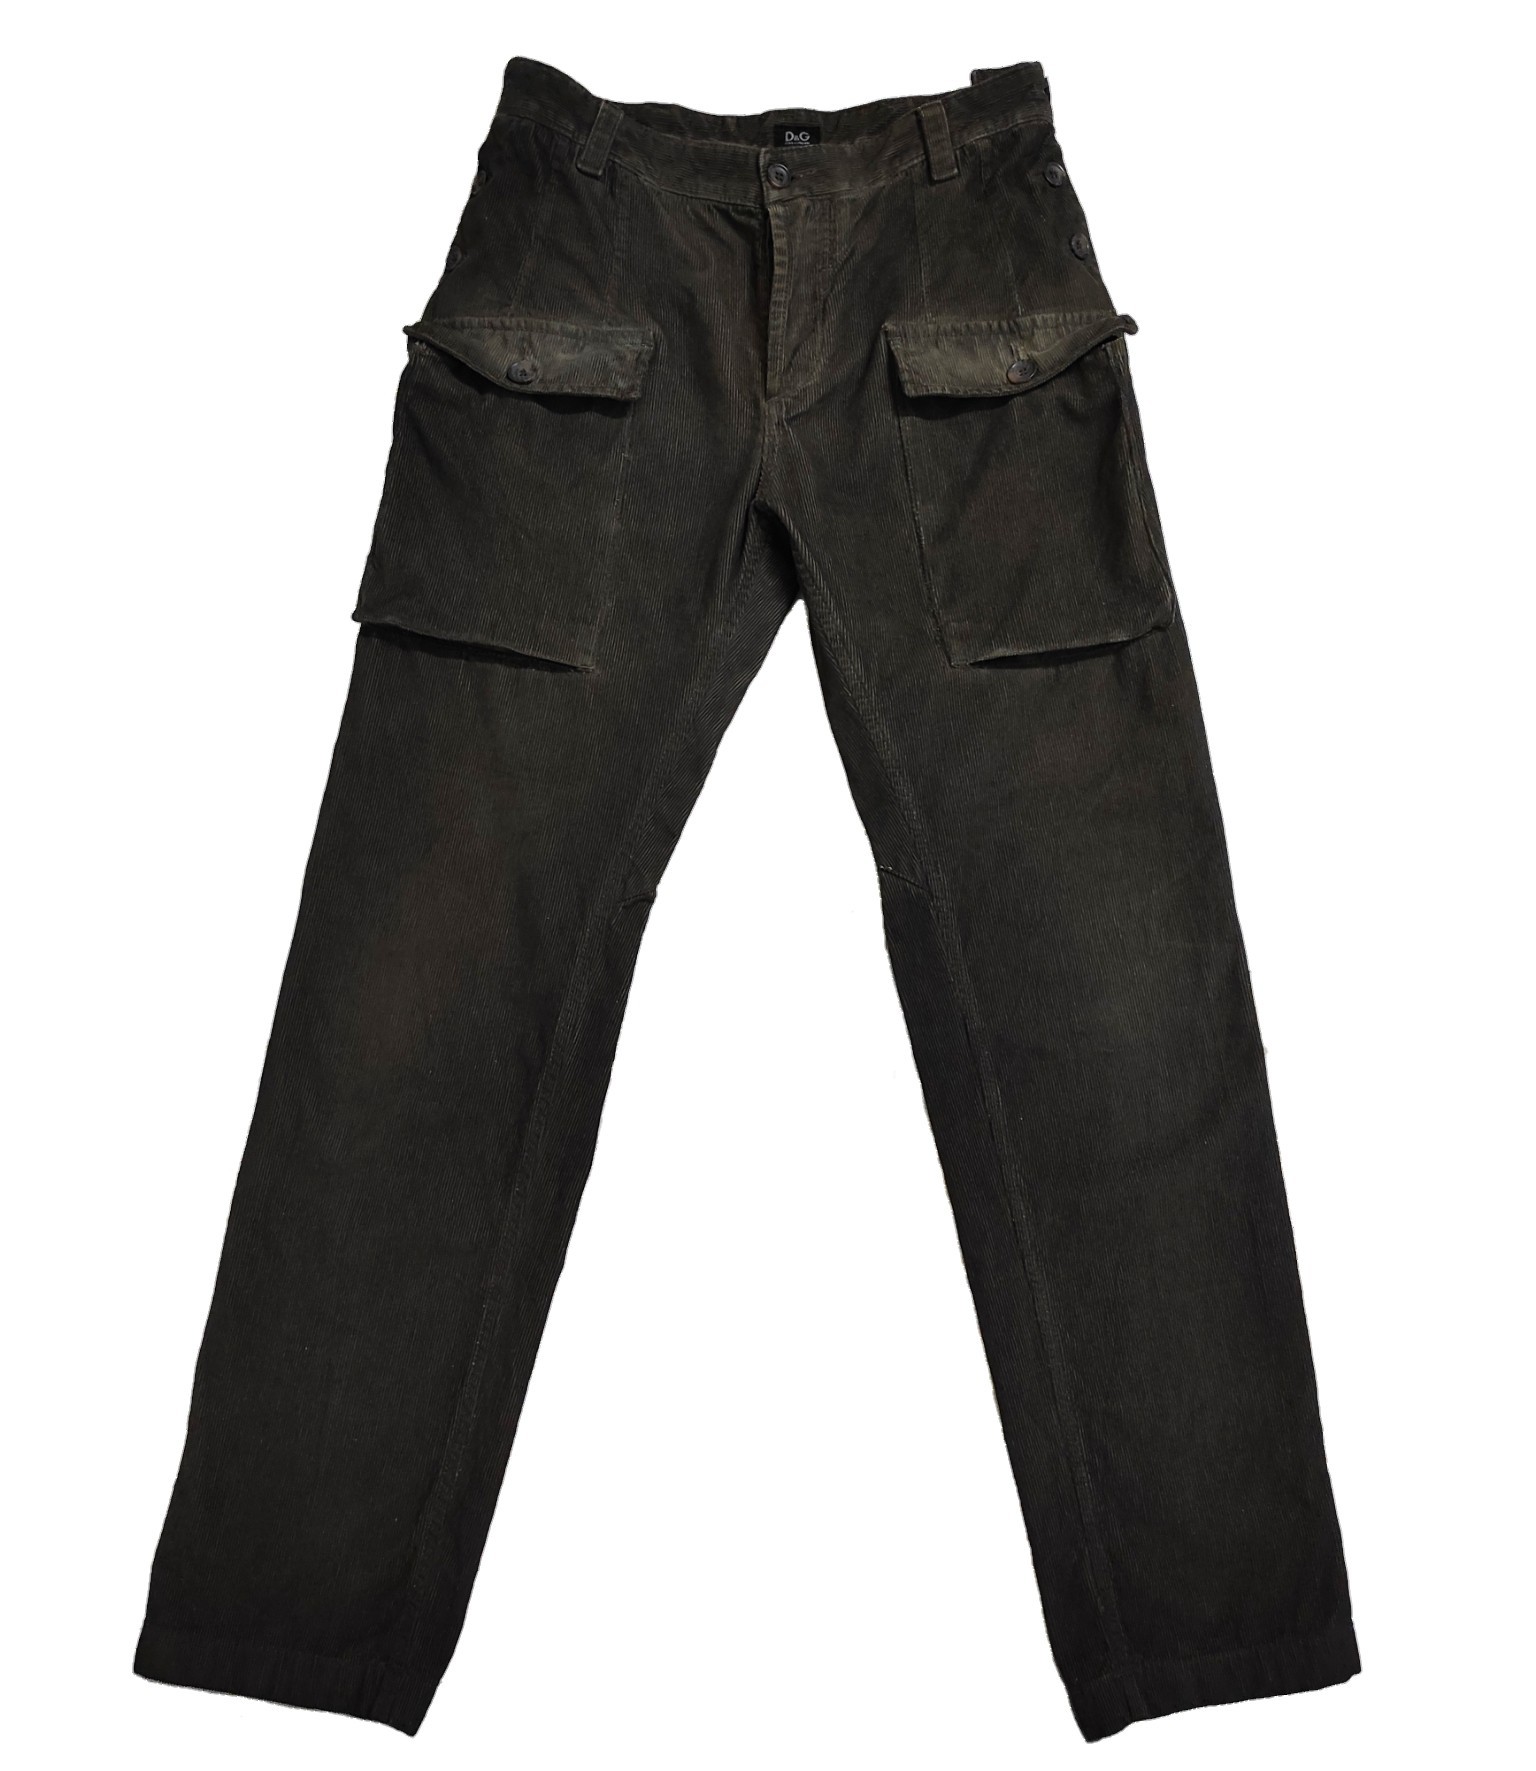 AW2003 Dolce and Gabbana pocket cargo military pants - 1